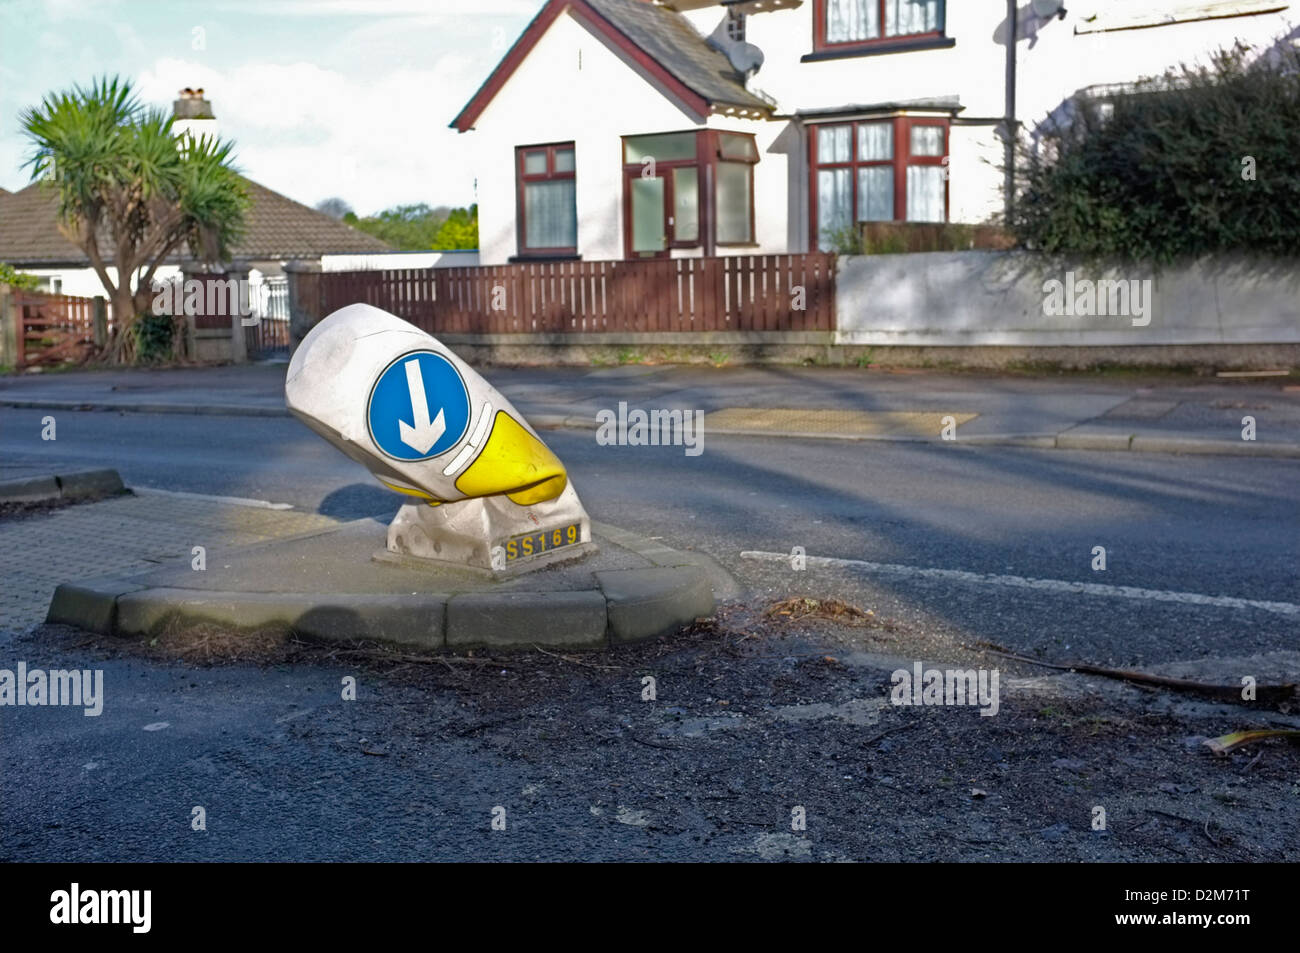 A damaged traffic sign in Falmouth, Cornwall UK Stock Photo